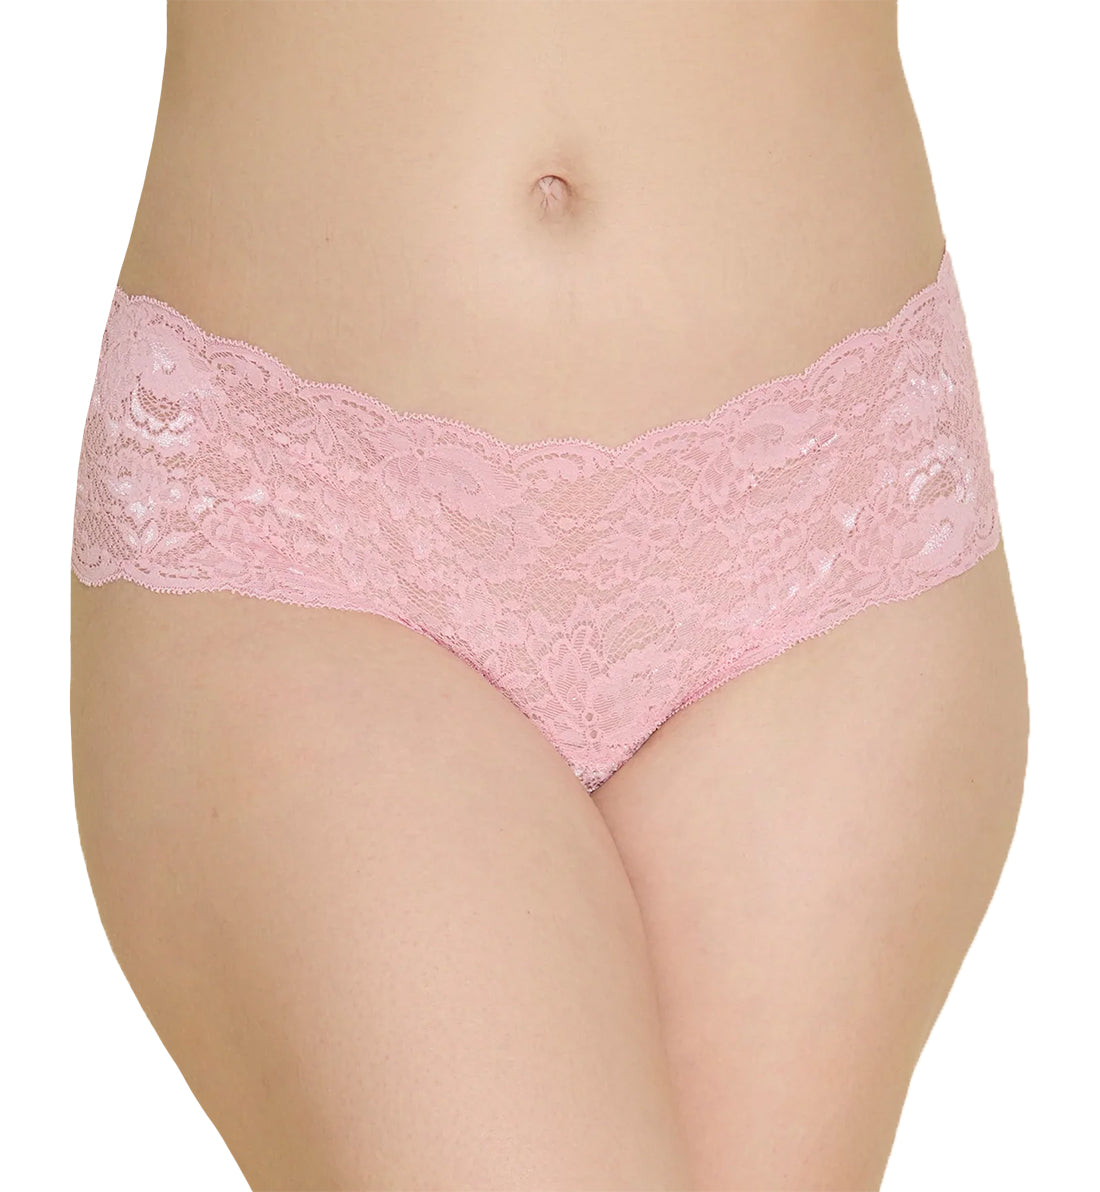 Cosabella Never Say Never Comfie Thong (NEVER0343),L/XL,Jaipur Pink - Jaipur Pink,L/XL